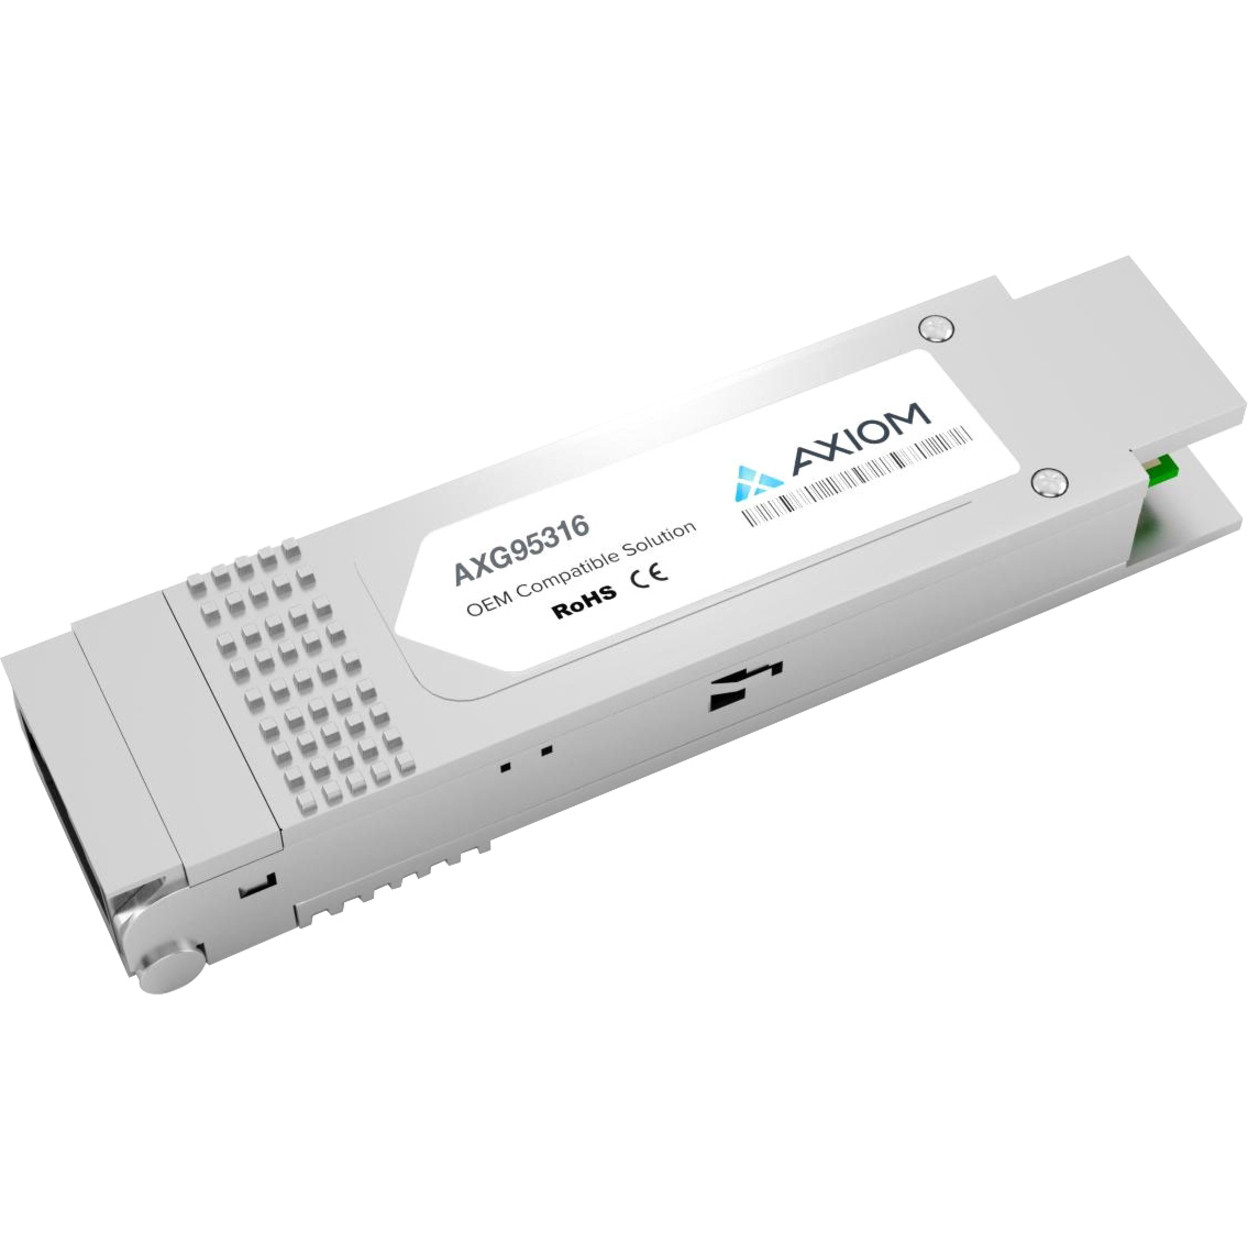 Axiom Memory Solutions 40GBASE-SR4 QSFP+ Transceiver for Dell407-BBOZTAA Compliant100% Dell Compatible 40GBASE-SR4 QSFP+ AXG95316